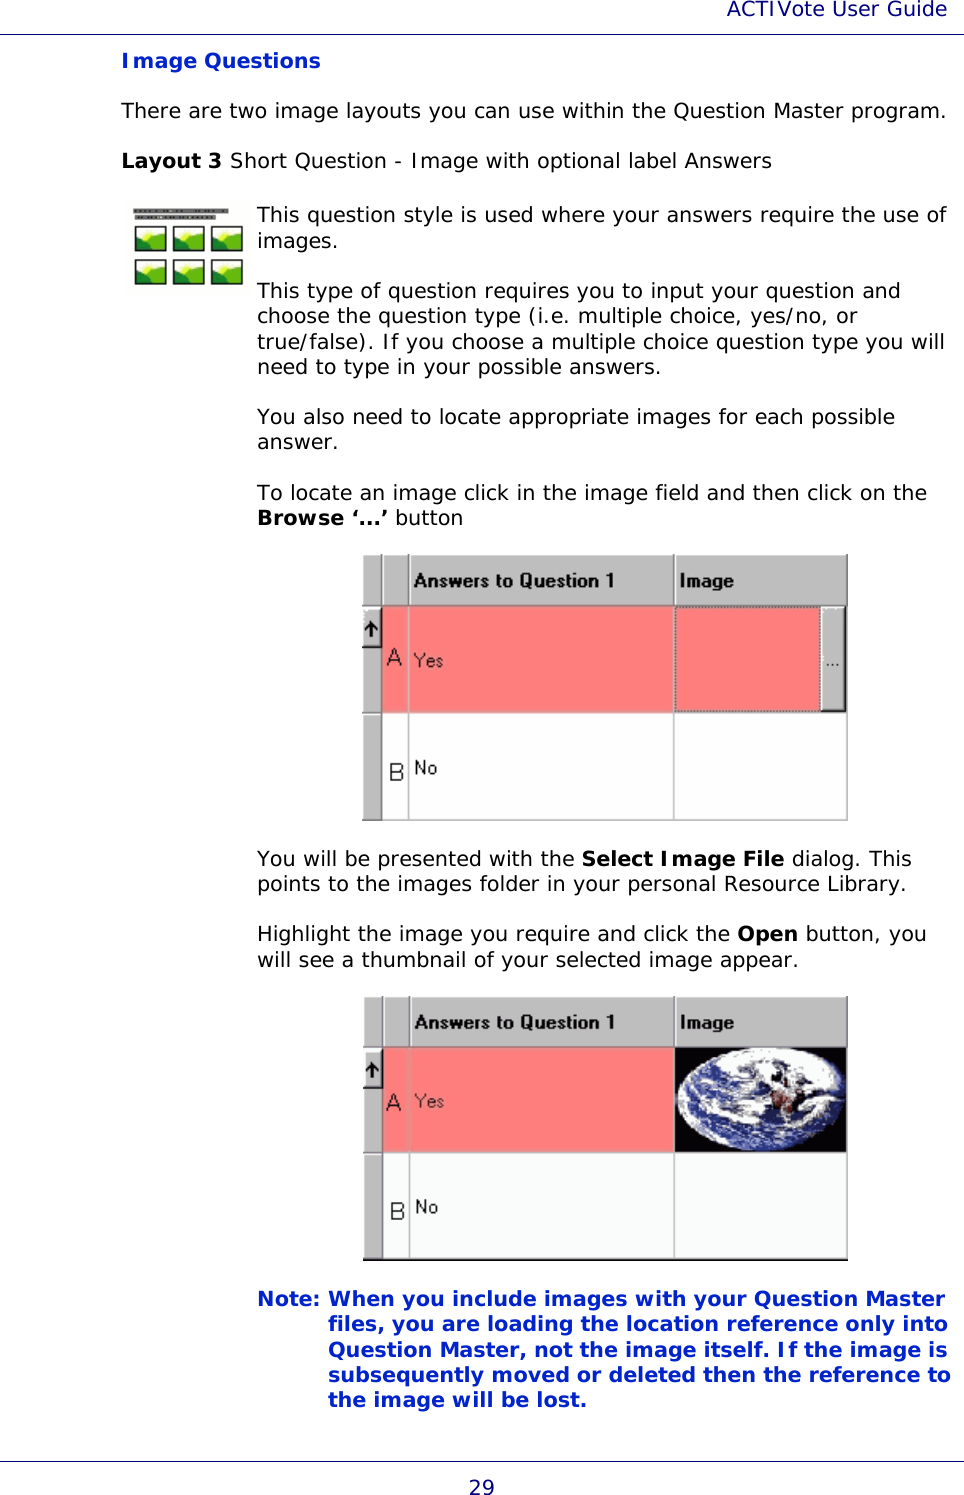 ACTIVote User Guide 29 Image Questions There are two image layouts you can use within the Question Master program. Layout 3 Short Question - Image with optional label Answers  This question style is used where your answers require the use of images. This type of question requires you to input your question and choose the question type (i.e. multiple choice, yes/no, or true/false). If you choose a multiple choice question type you will need to type in your possible answers. You also need to locate appropriate images for each possible answer. To locate an image click in the image field and then click on the Browse ‘...’ button  You will be presented with the Select Image File dialog. This points to the images folder in your personal Resource Library. Highlight the image you require and click the Open button, you will see a thumbnail of your selected image appear.  Note: When you include images with your Question Master files, you are loading the location reference only into Question Master, not the image itself. If the image is subsequently moved or deleted then the reference to the image will be lost.  